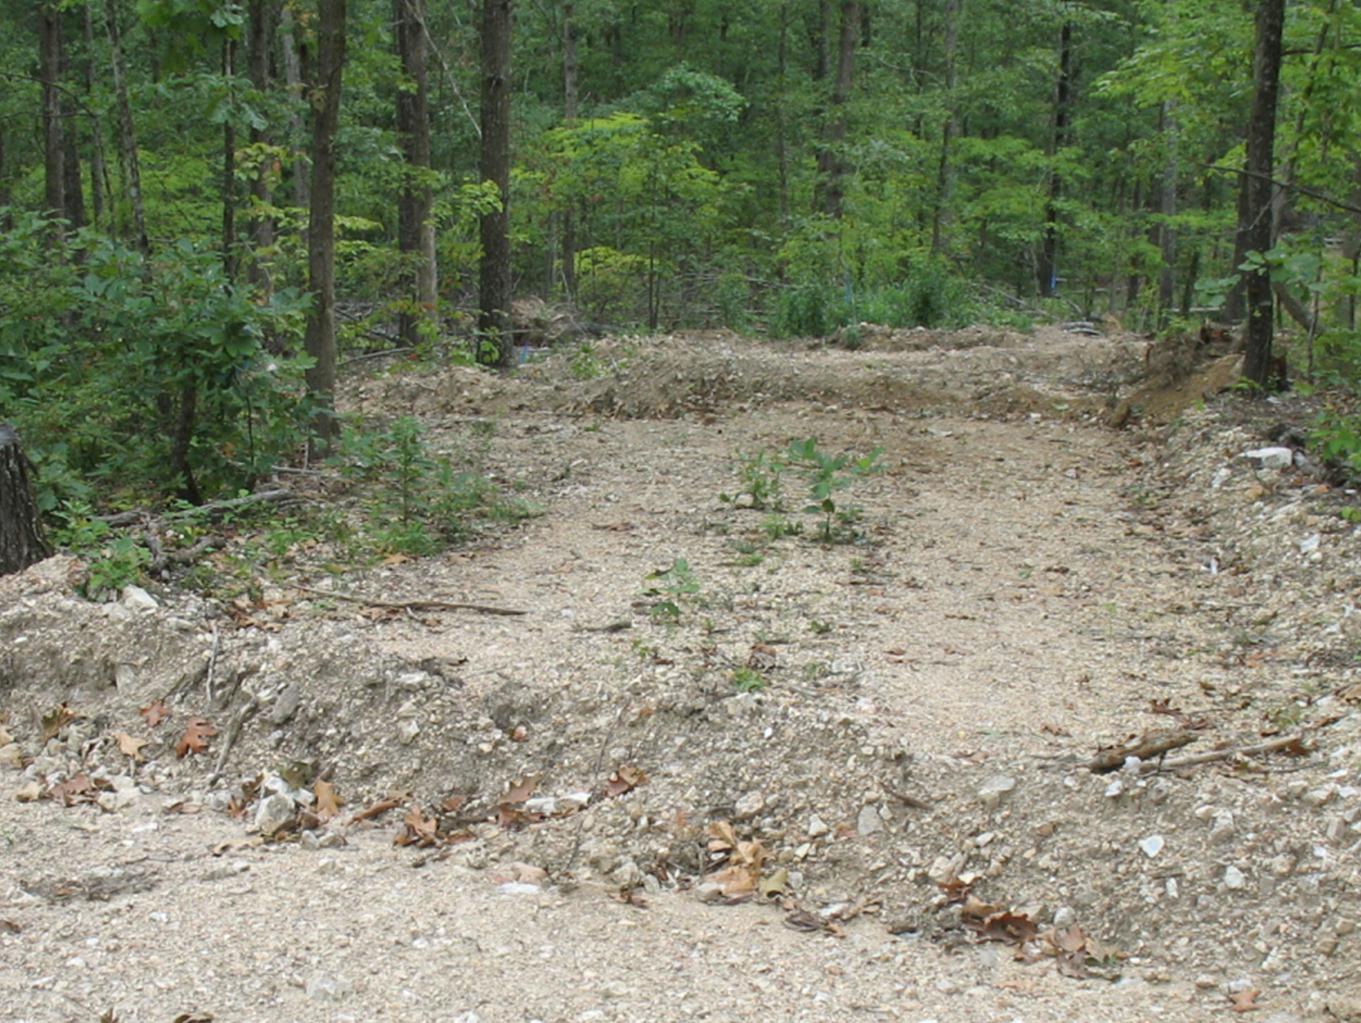 A single-lane dirt road runs through a green forest with a slightly raised dirt structure running across from one side to the other and another similar diversion several yards further up the road.